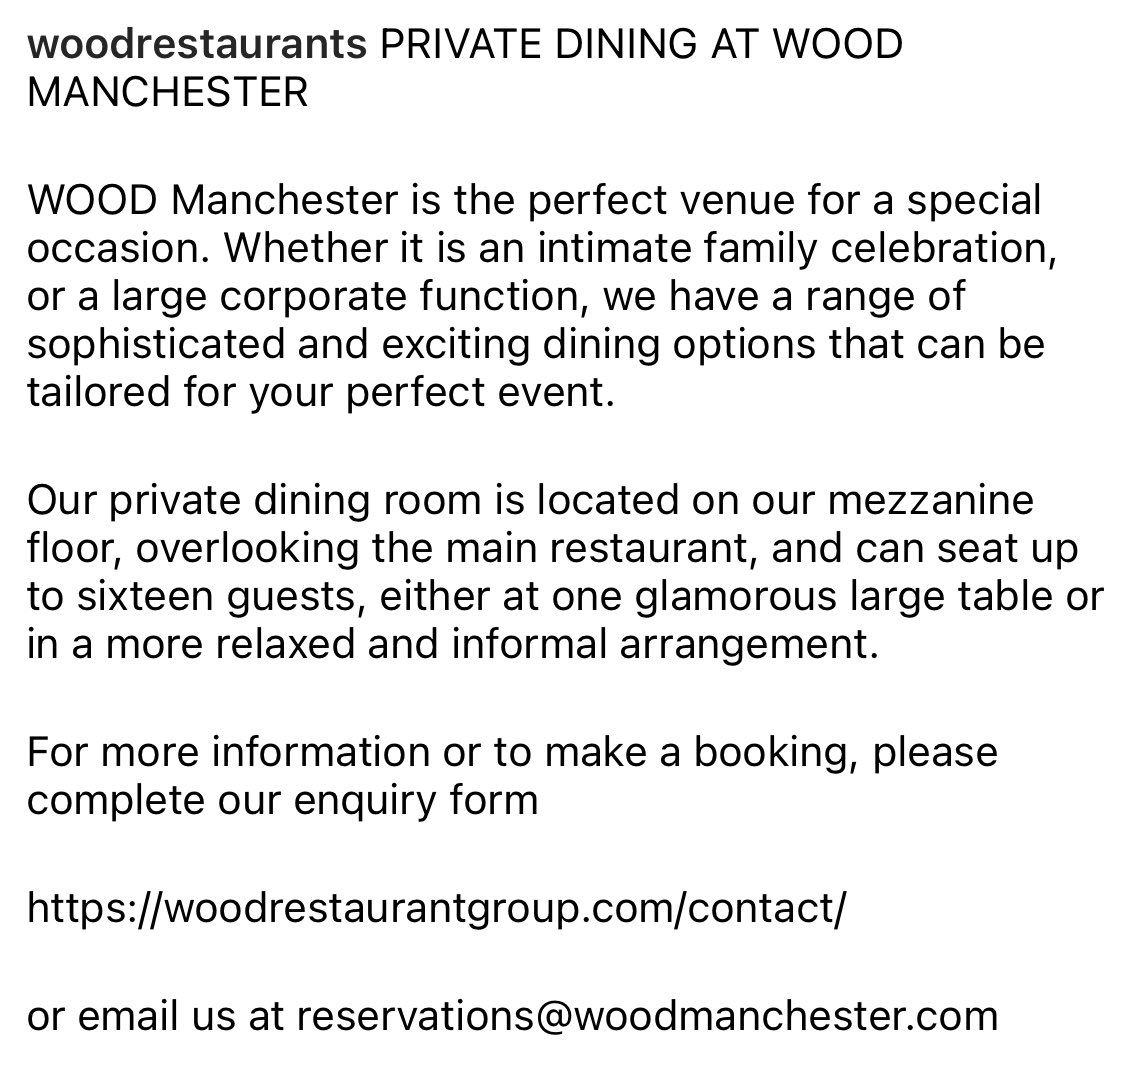 PRIVATE DINING AT WOOD MANCHESTER A perfect venue for a special occasion. Whether it is an intimate family celebration, or a large corporate function, For info please complete our enquiry form woodrestaurantgroup.com/contact/ or email us at reservations@woodmanchester.com